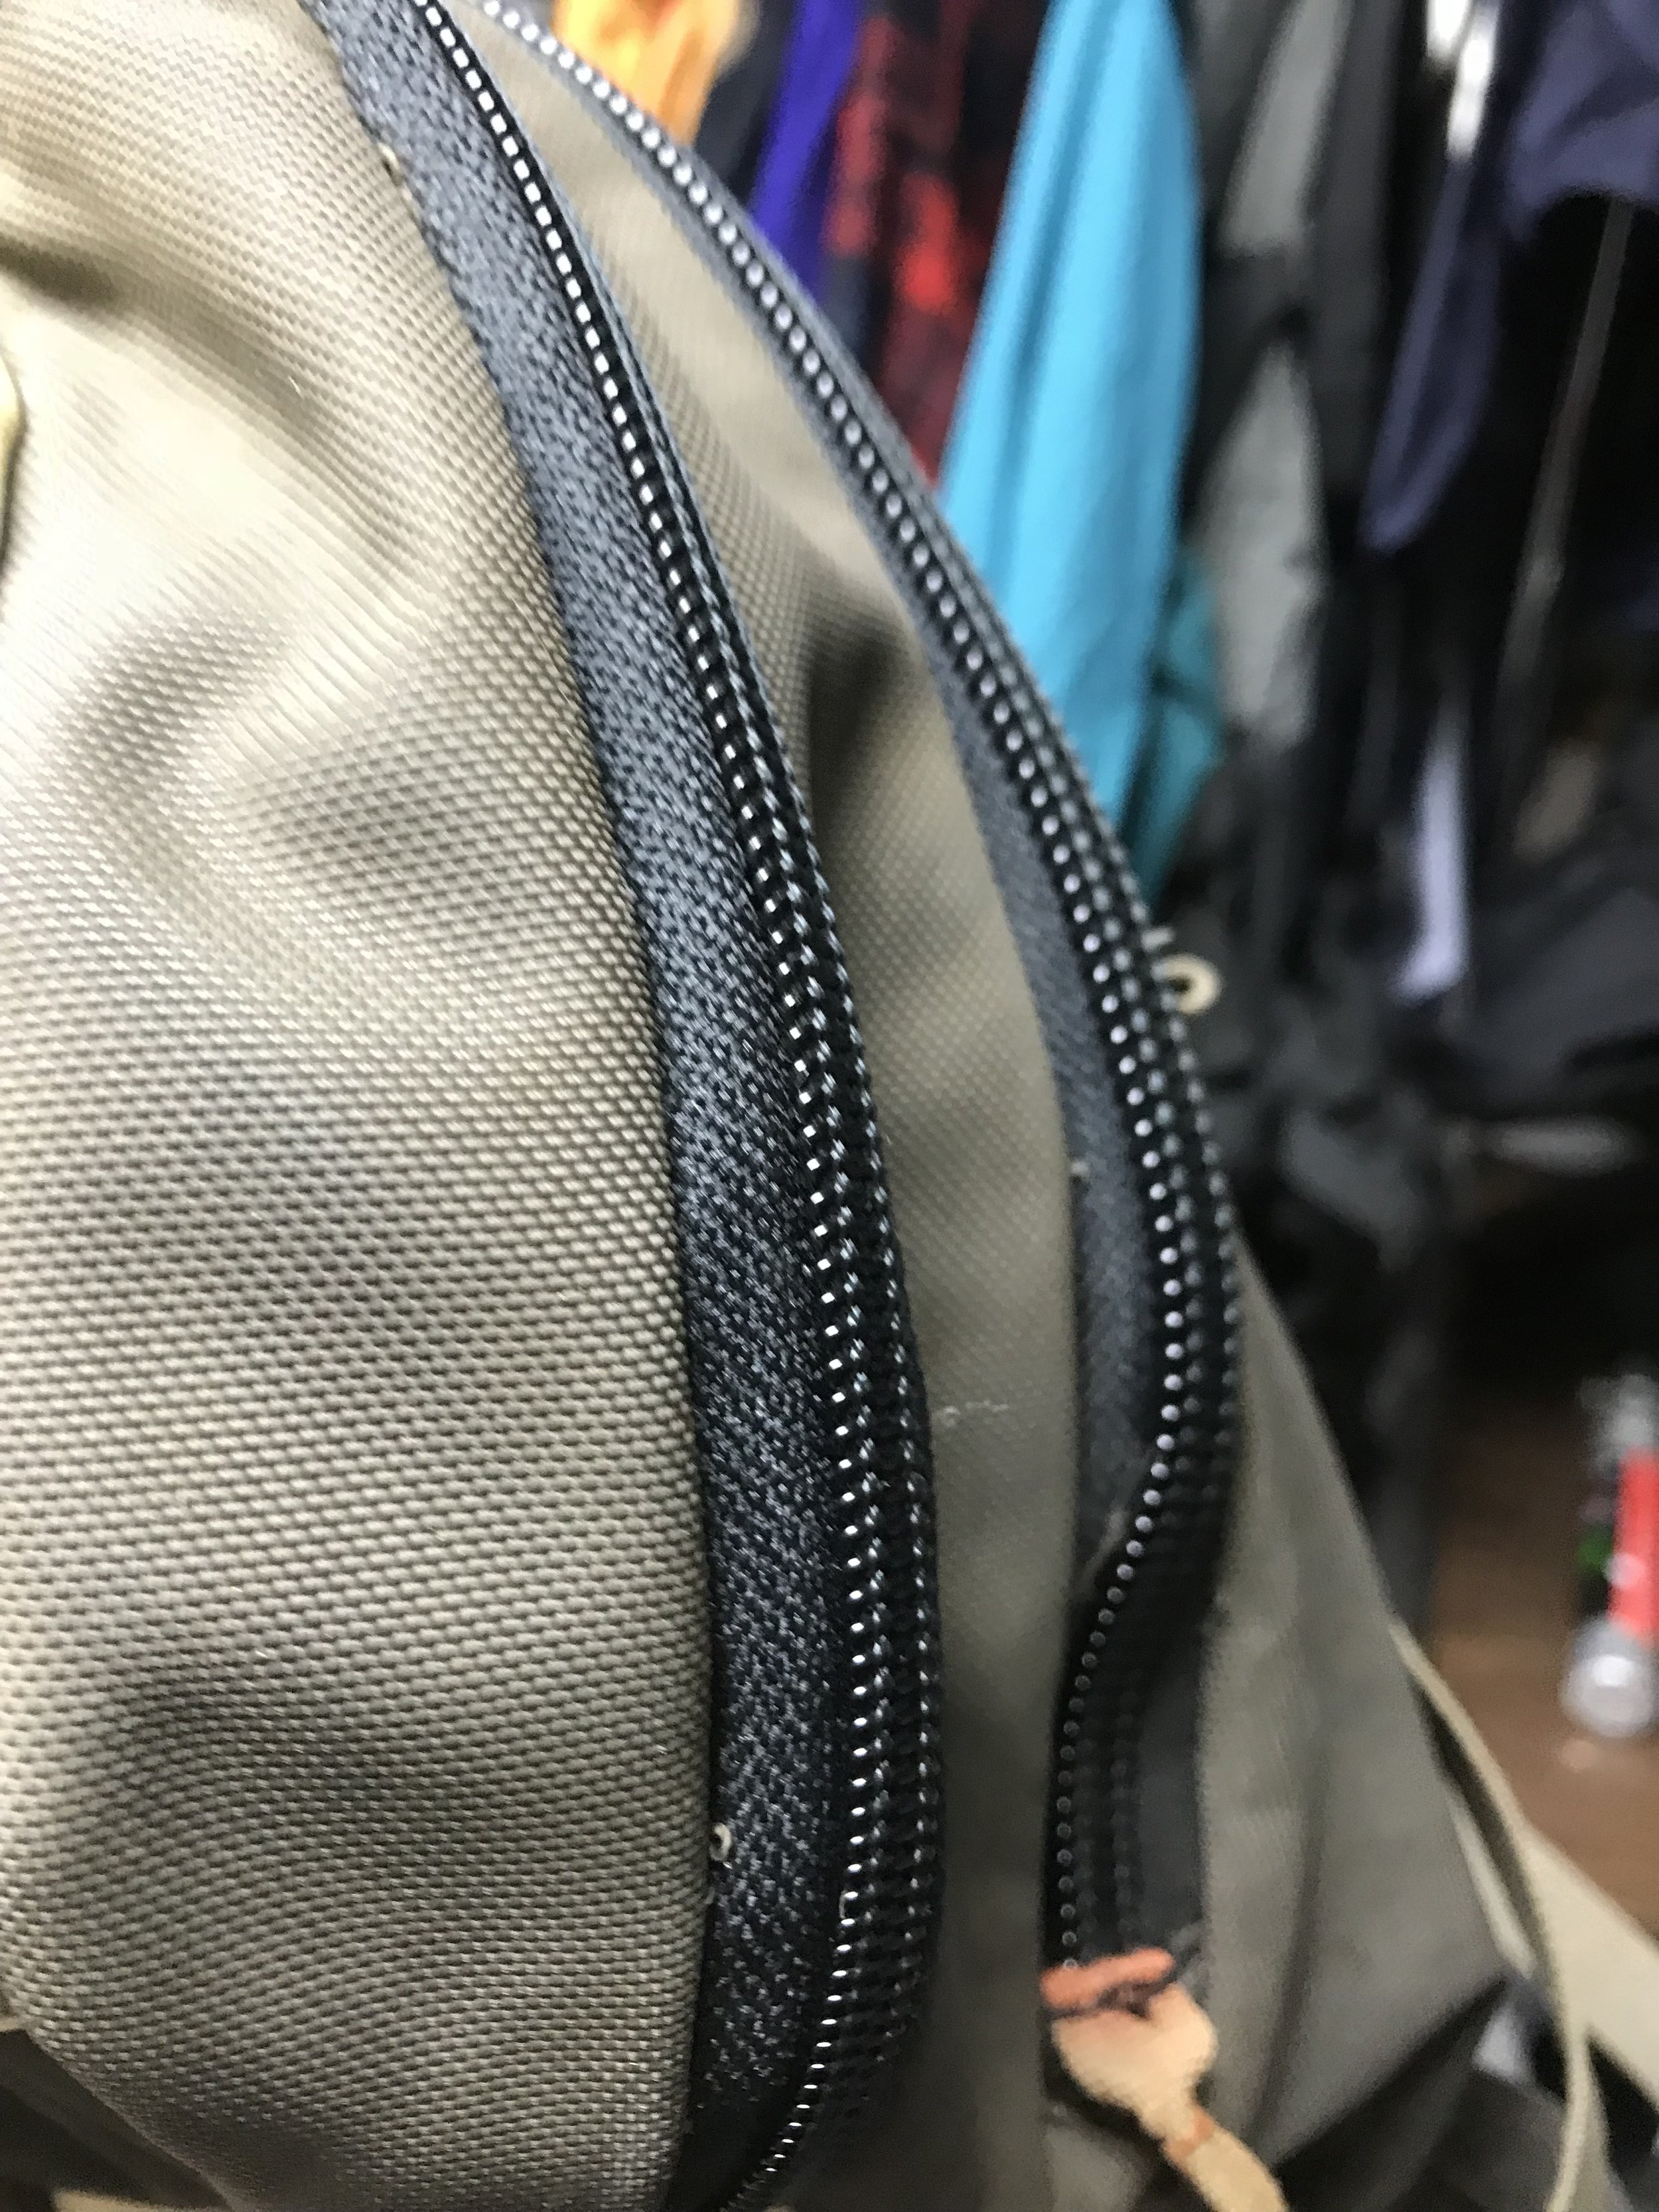 Outdoor Gear Repair - The Fixed Line - Replace Zippers in jackets